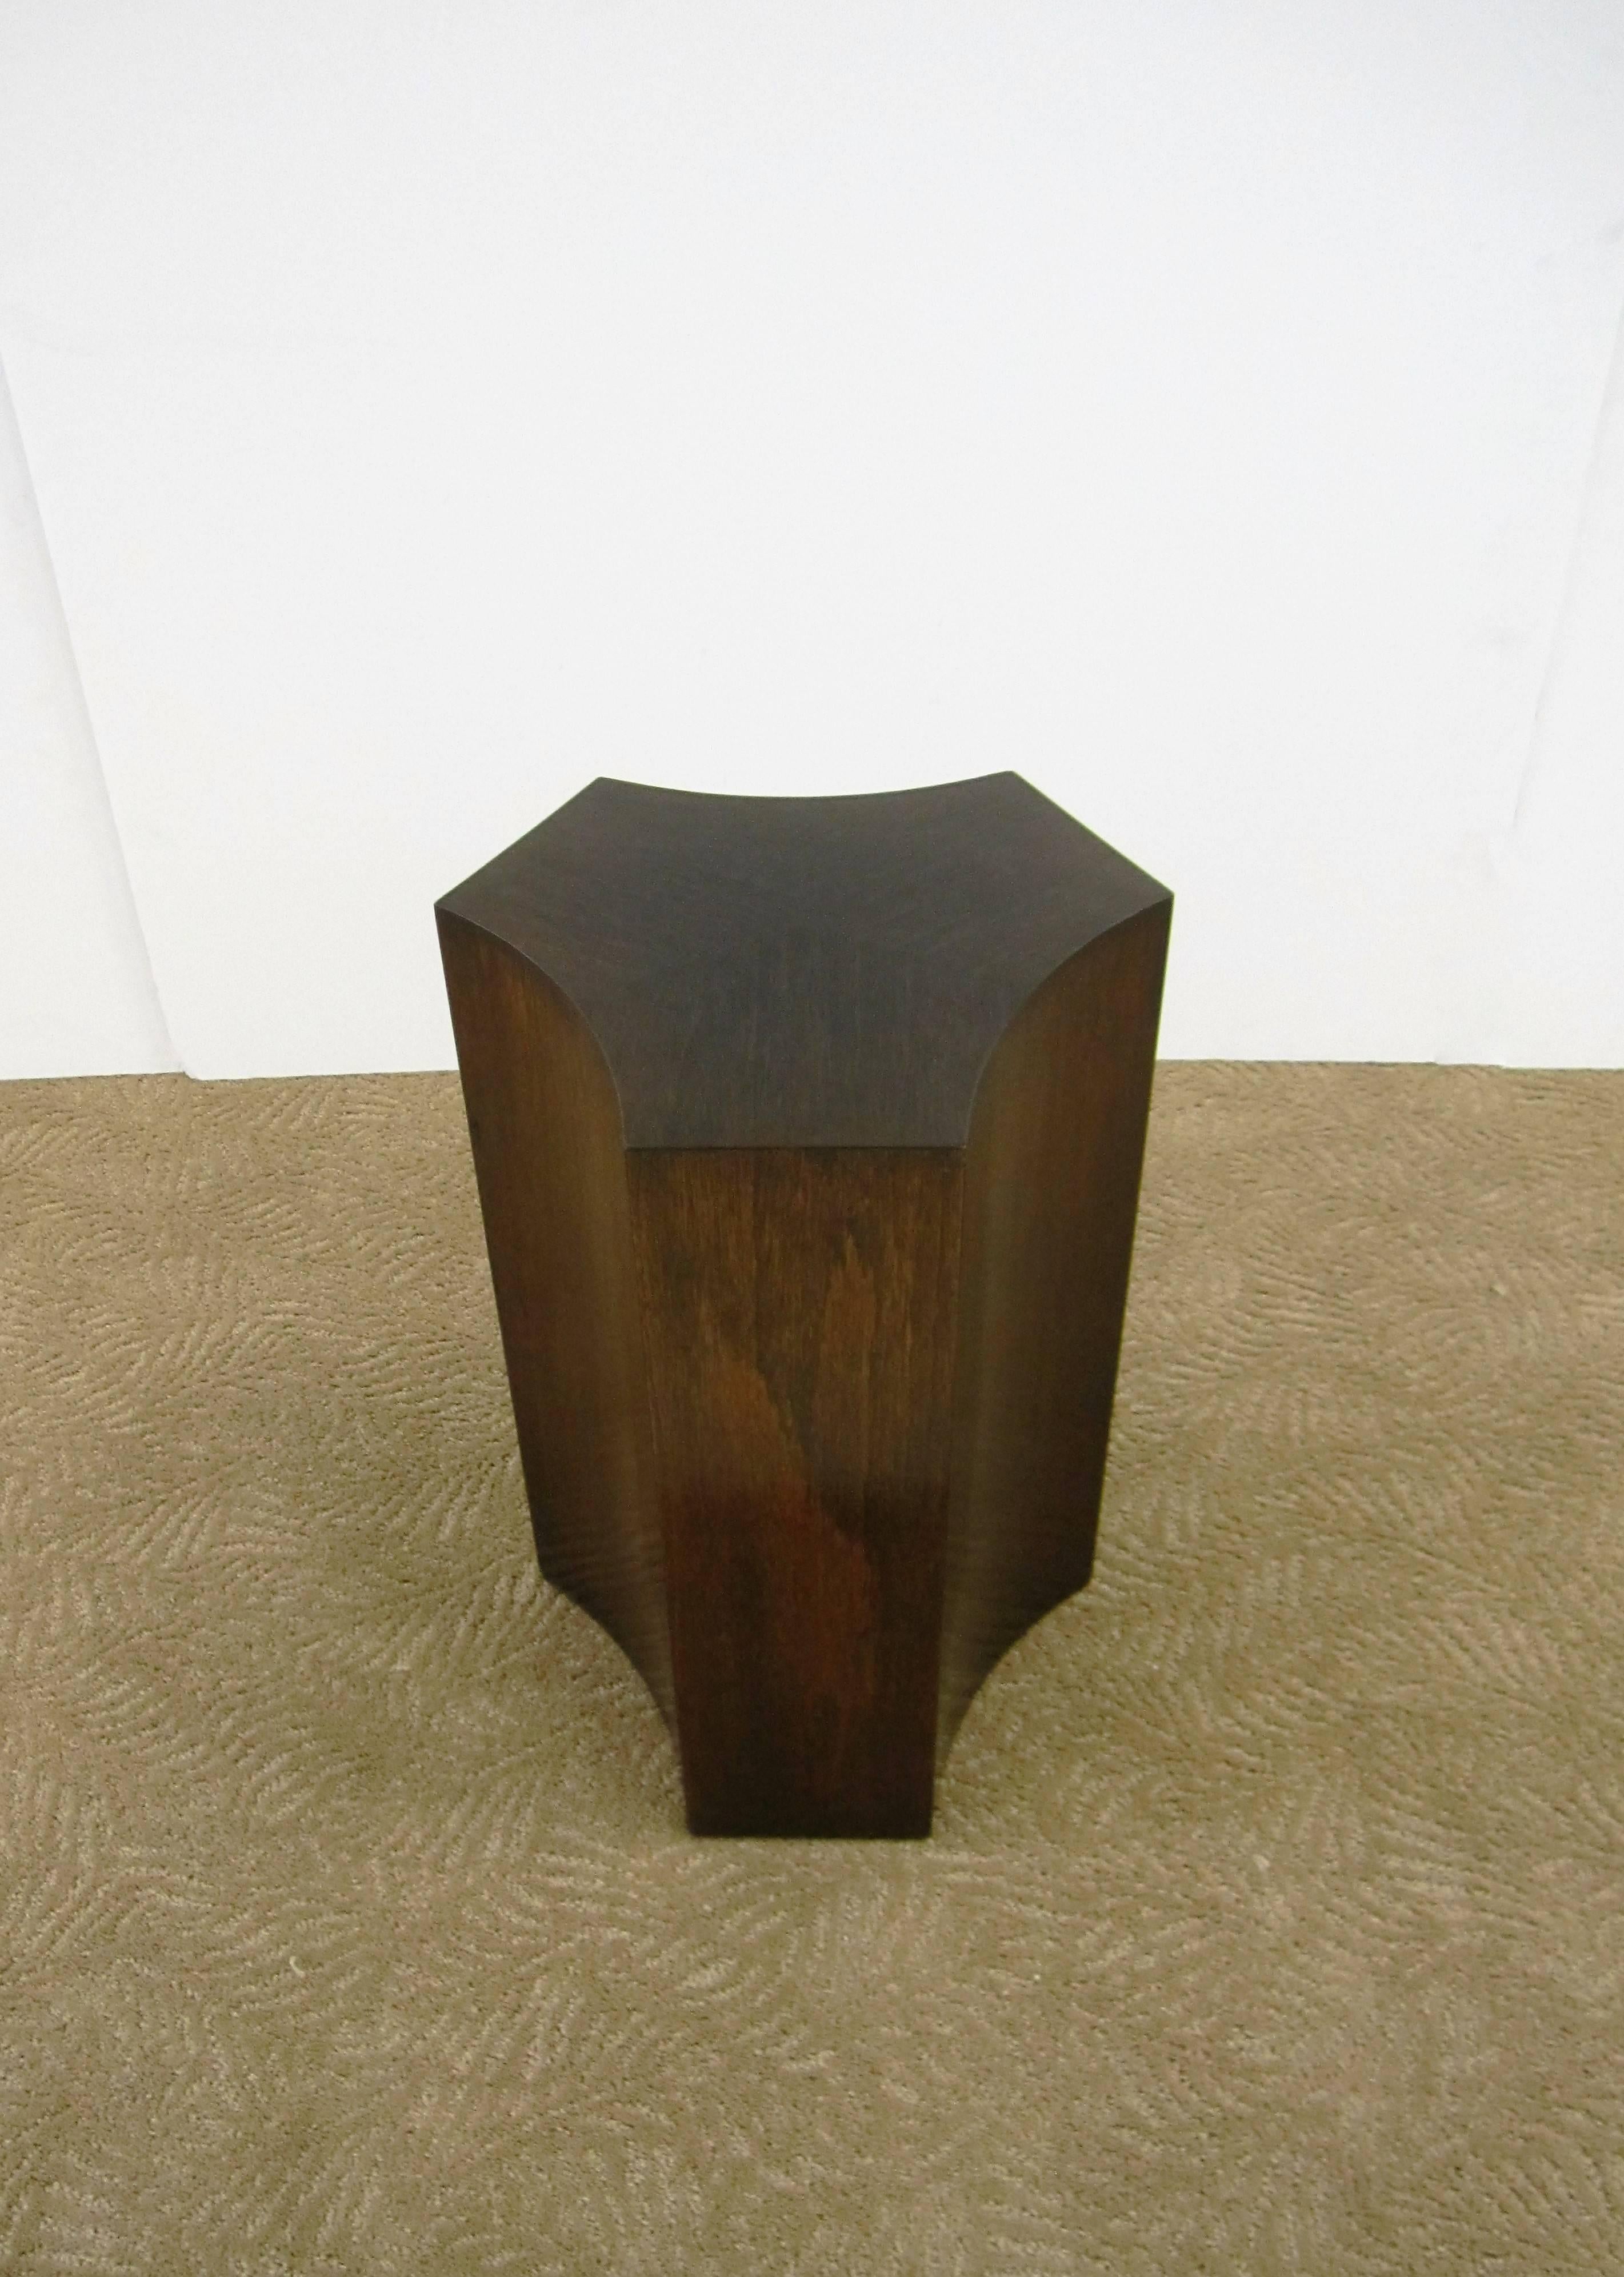 A beautiful quality and elegantly designed vintage warm wood pedestal side table in geometric form. 

Table measures: 19 in. H x 10.5 in. W x 10.5 in. D. 

Item available here online. By request, item can be made available by appointment to the